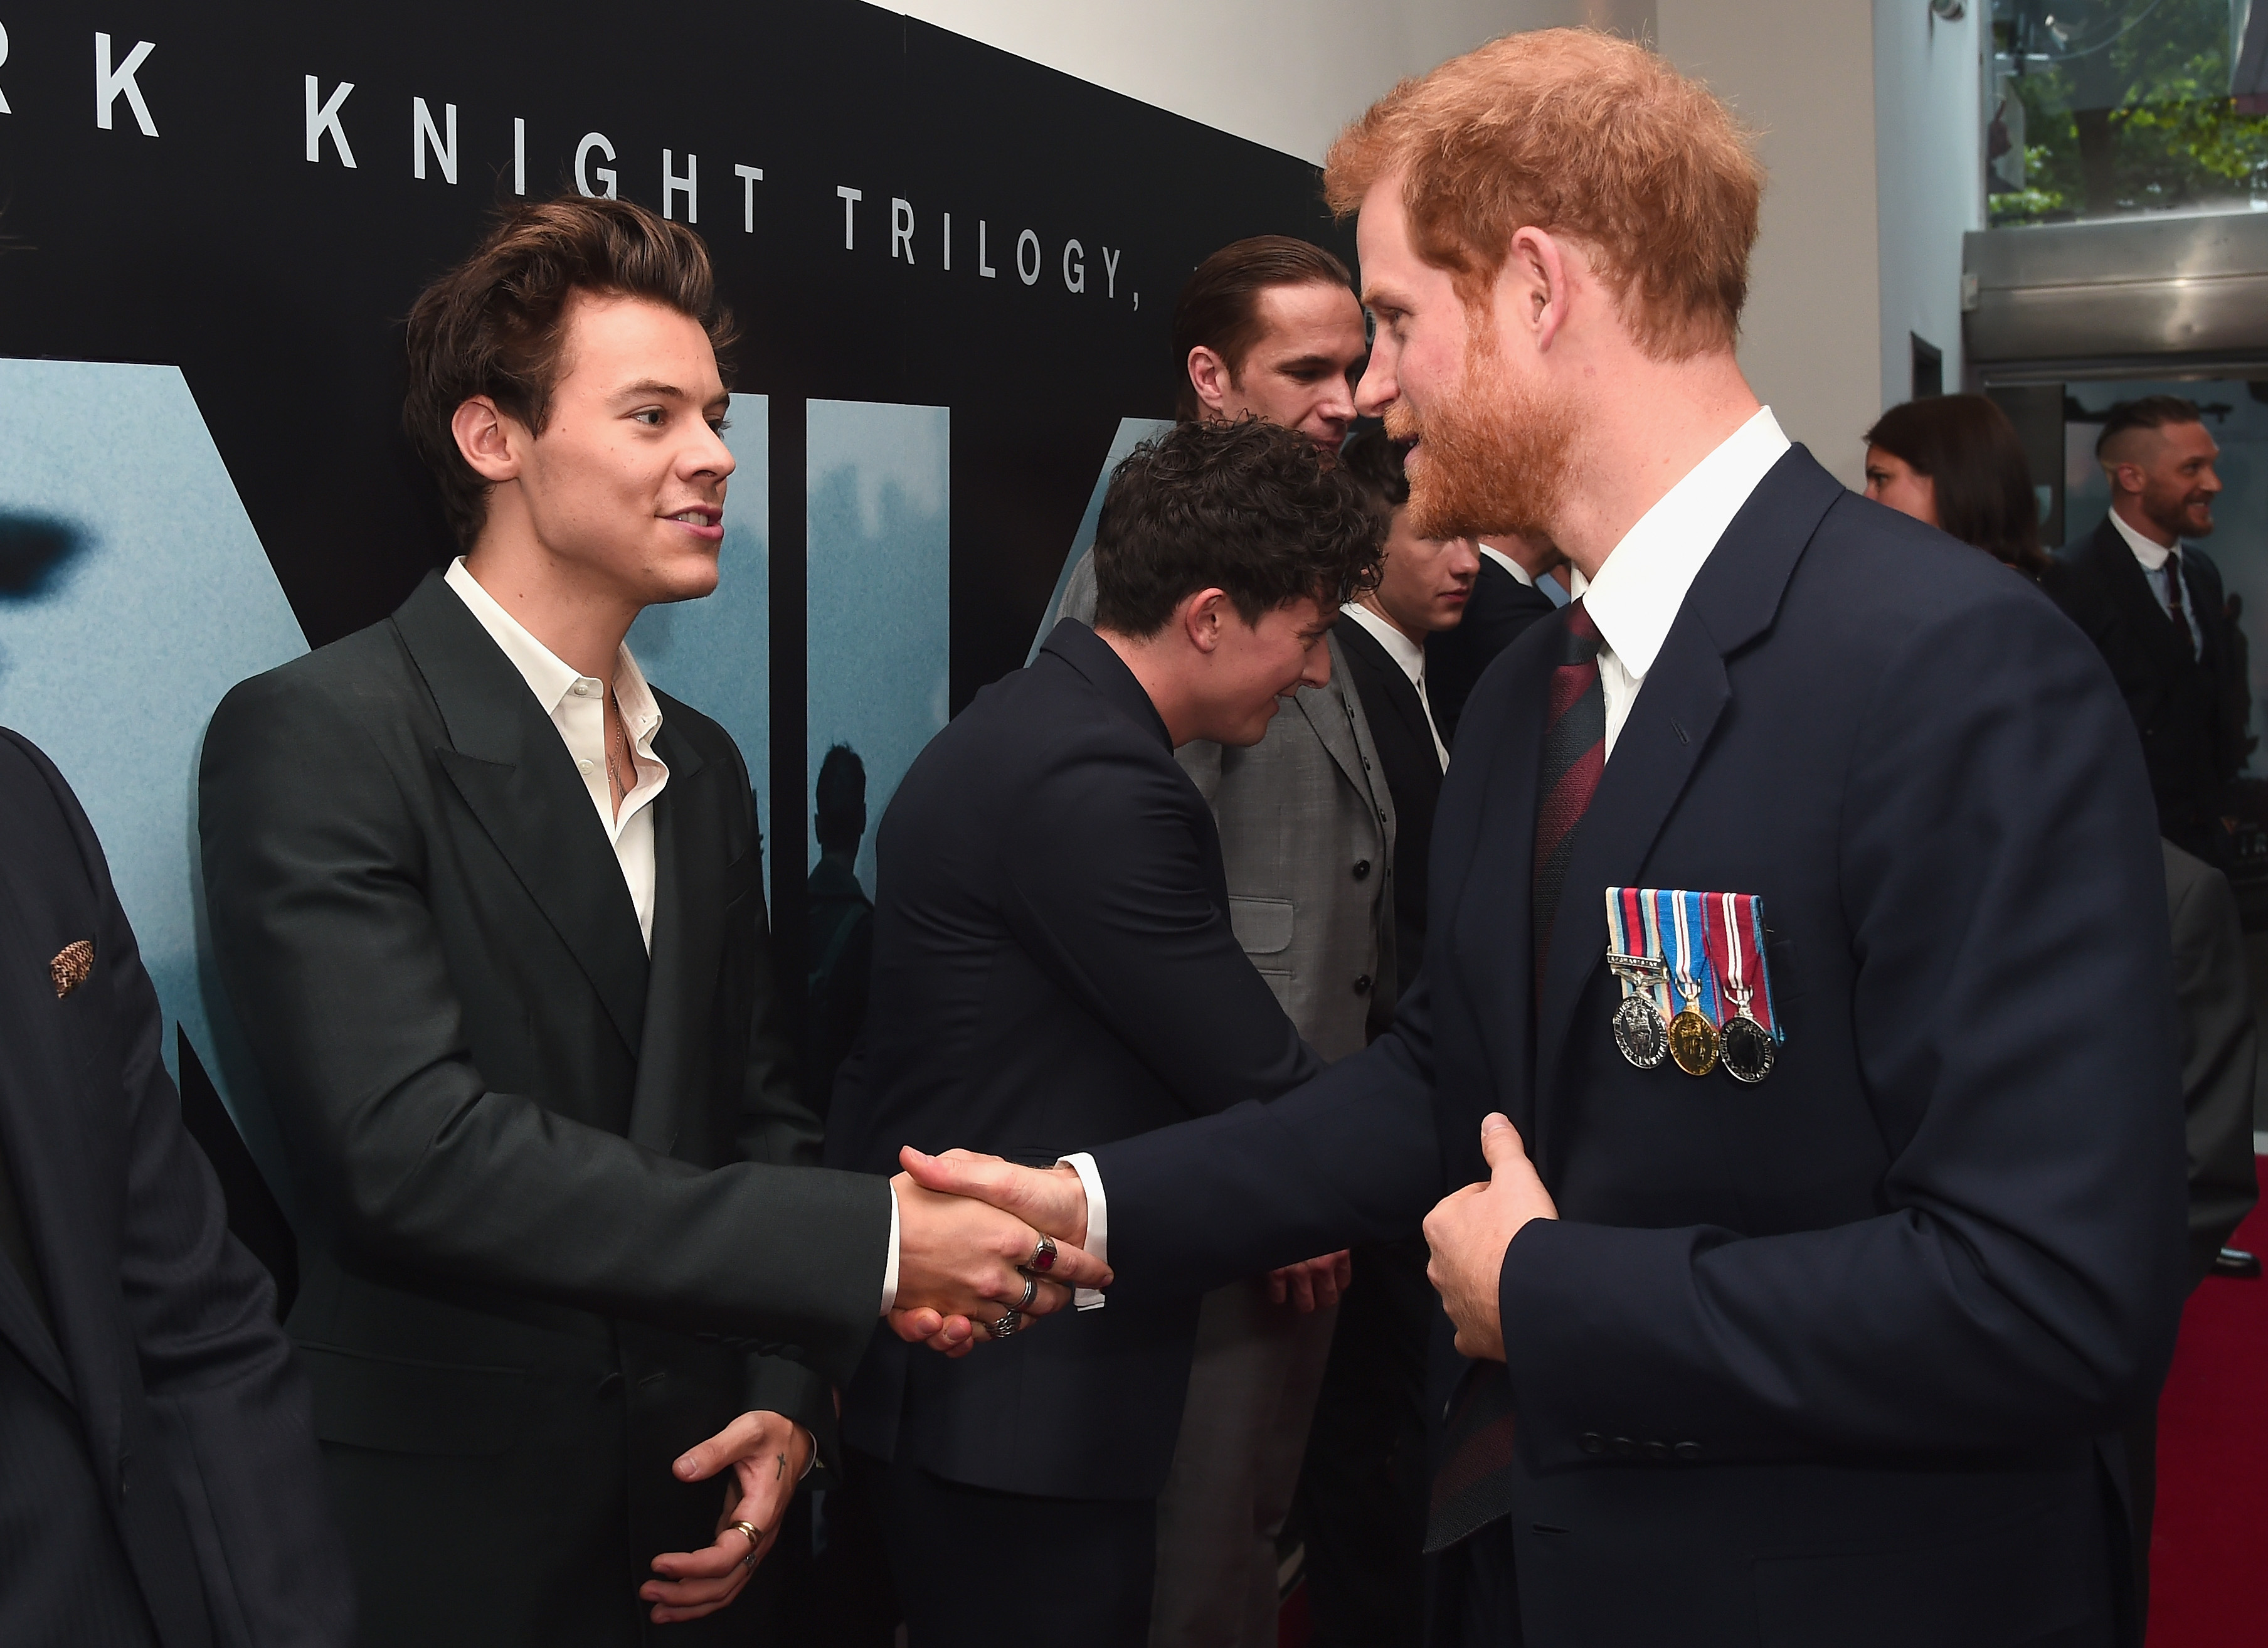 LONDON, ENGLAND - JULY 13:  Actor Harry Styles and Prince Harry attend the 'Dunkirk' World Premiere at Odeon Leicester Square on July 13, 2017 in London, England.   (Photo by Eamonn M. McCormack - WPA Pool/Getty Images) (Eamonn M. McCormack&mdash;Getty Images)